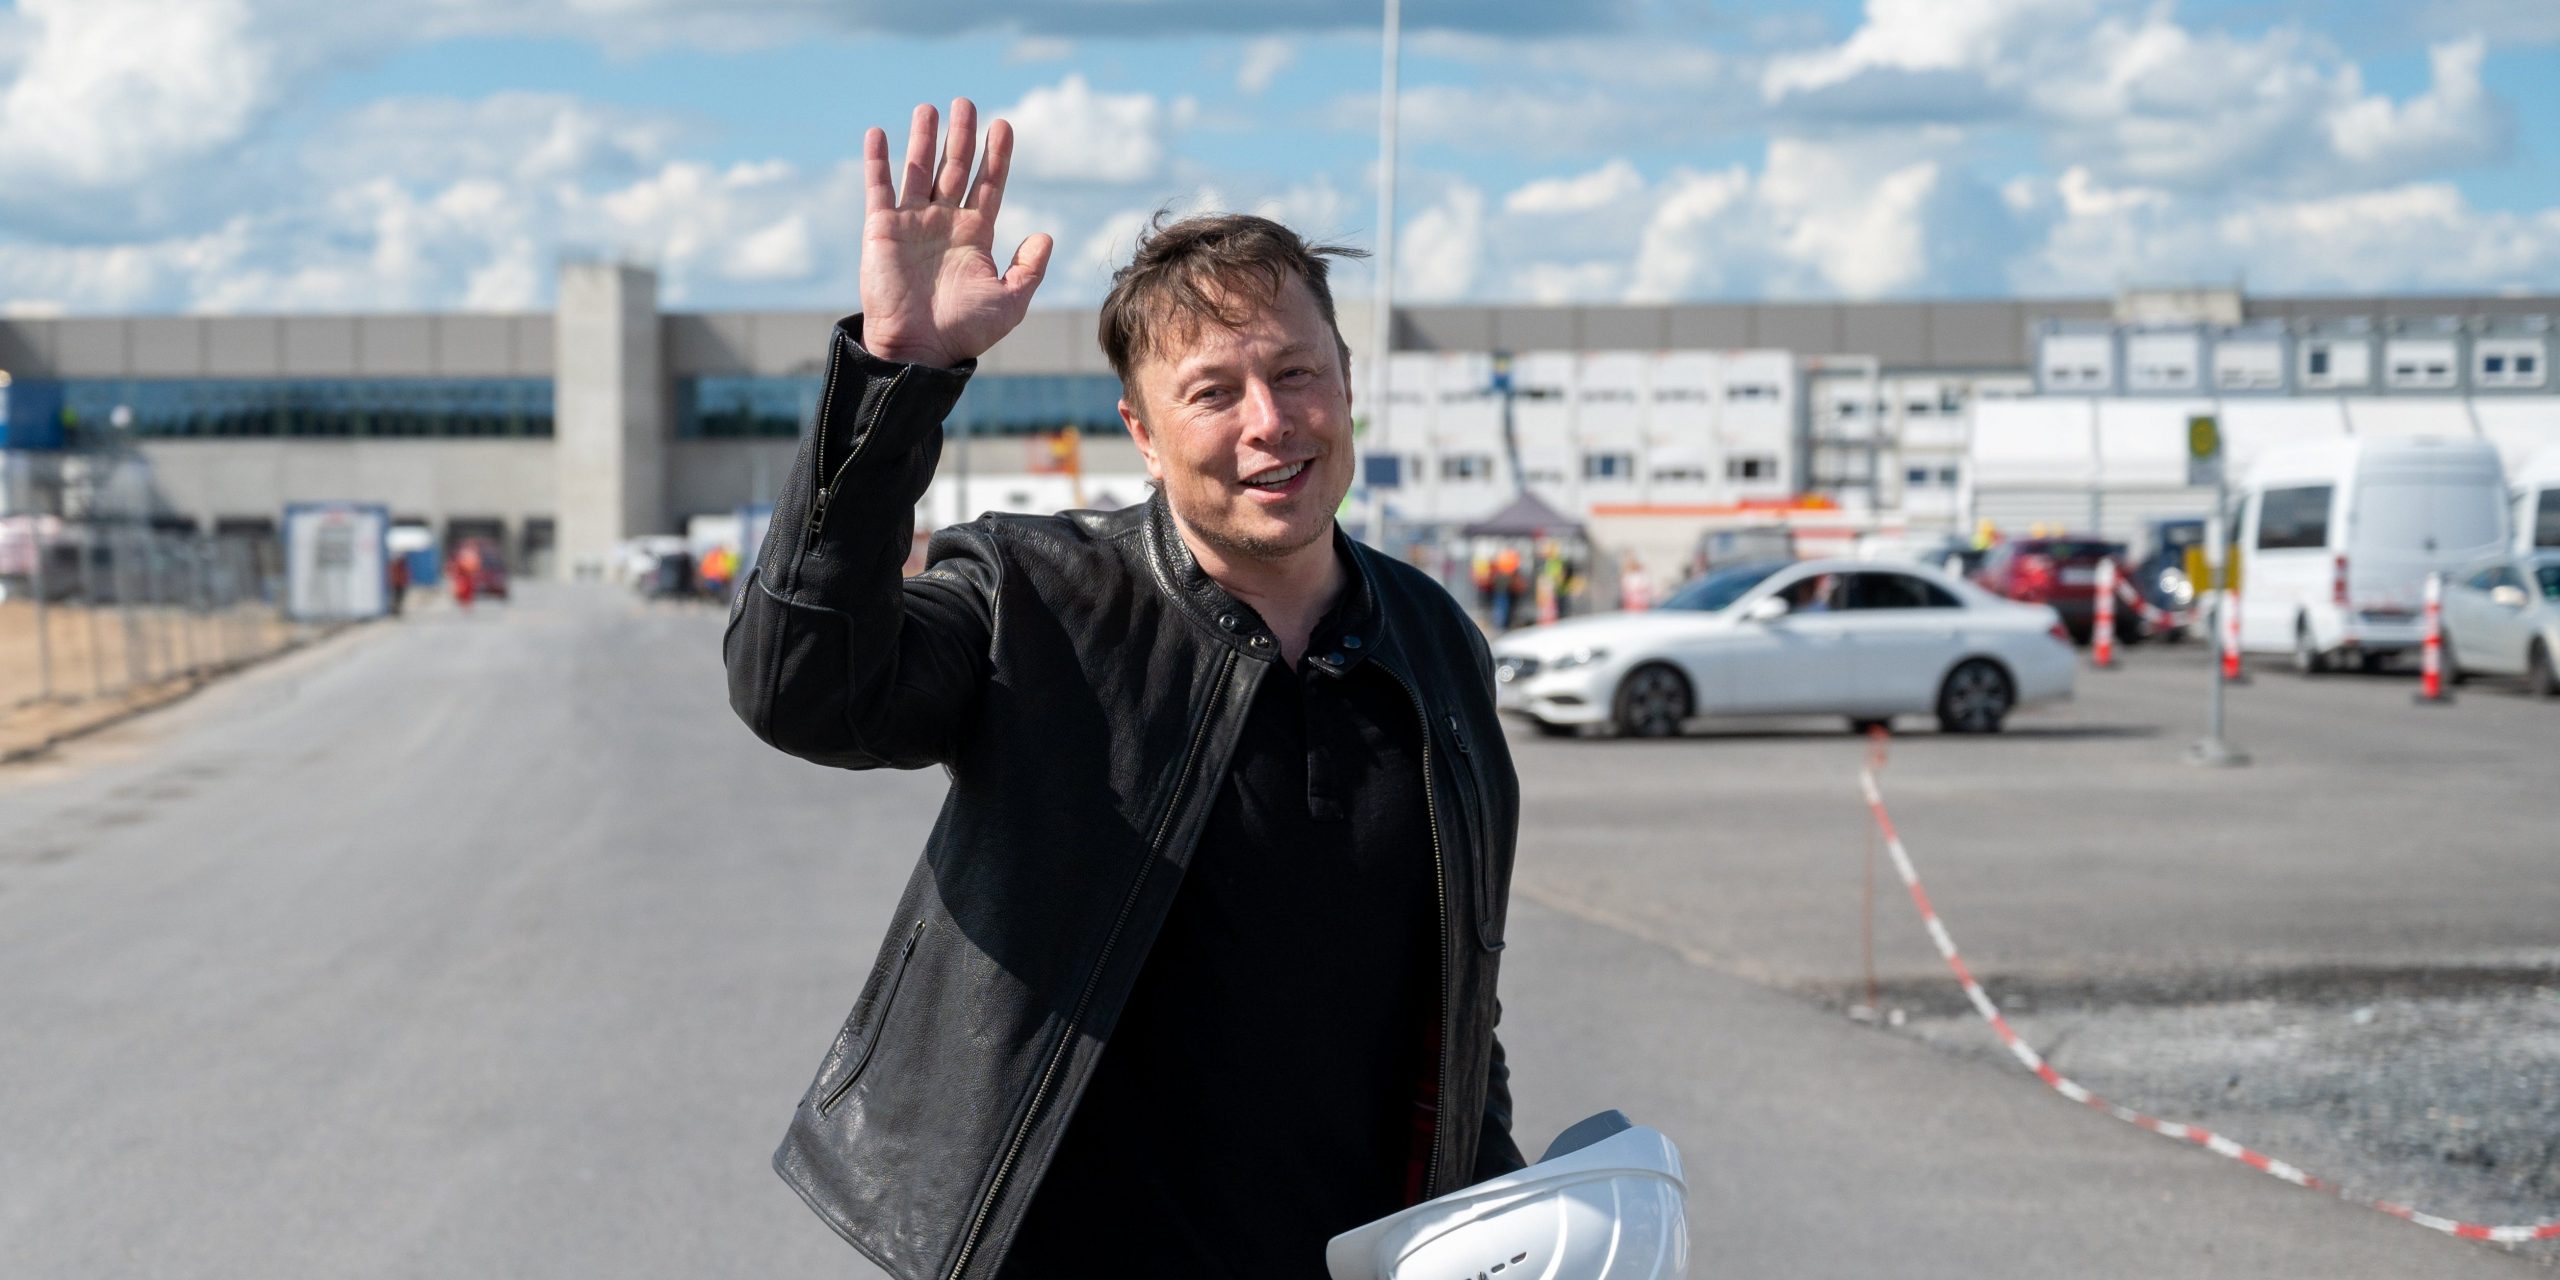 Elon Musk, Tesla CEO, stands on the construction site of the Tesla factory and waves, in Grünheide near Berlin, on  May 17, 2021.